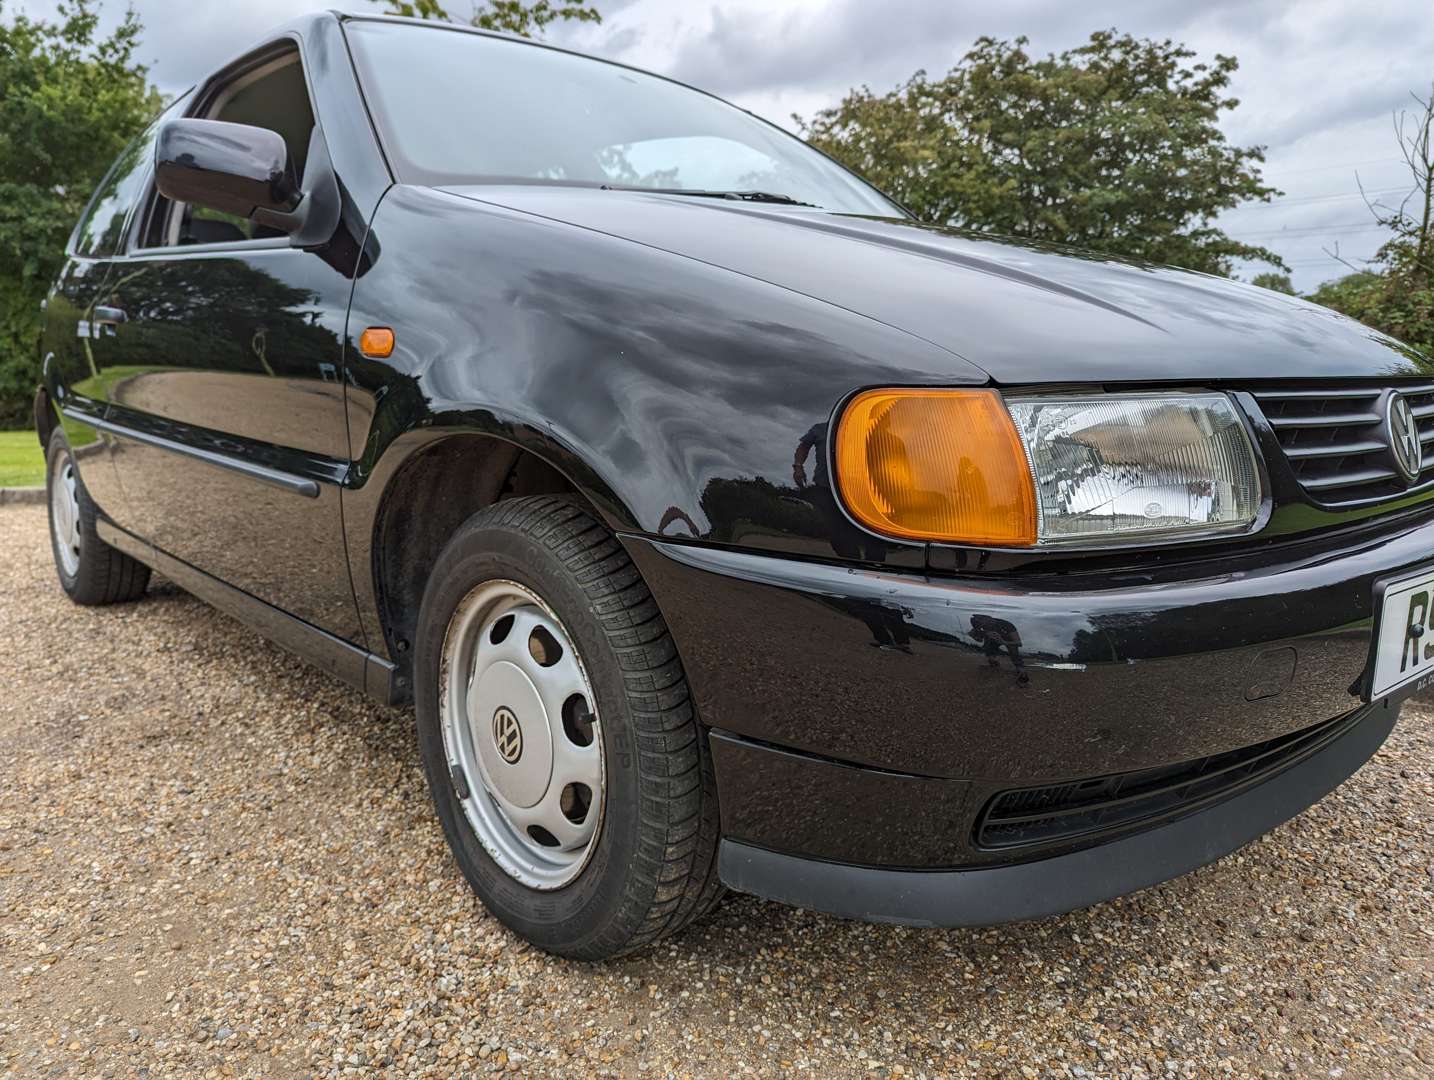 <p>1997 VW POLO 1.4 CL ONE OWNER&nbsp;</p>